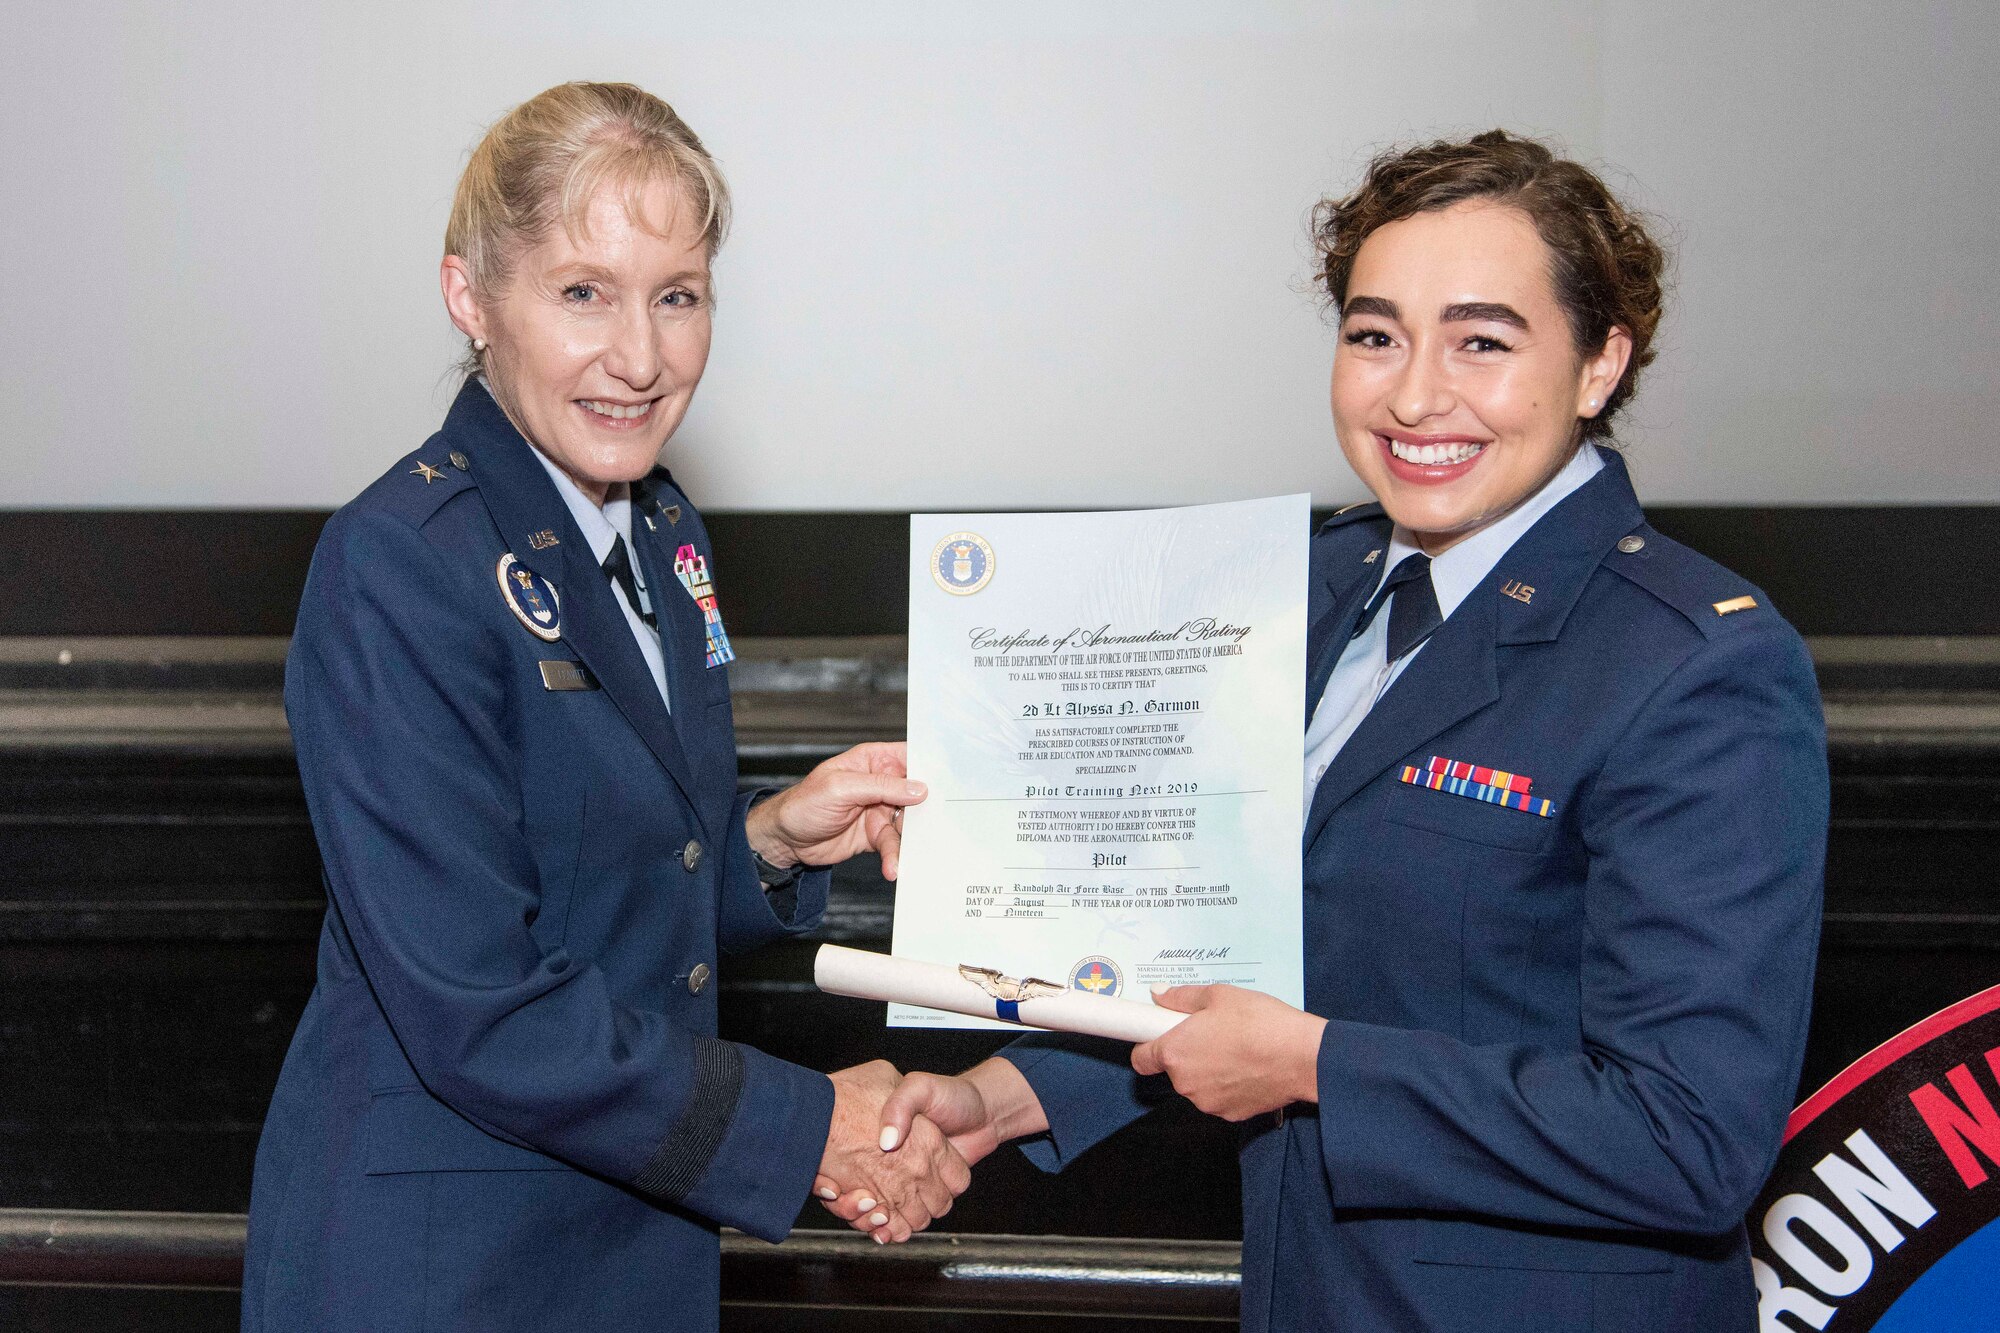 Brig. Gen. Jeannie Leavitt, Air Force Recruiting Service commander, presents 2nd Lt. Alyssa Garmon her certificate of aeronautical rating during Pilot Training Next graduation ceremony August 29, 2019, at Joint Base San Antonio-Randolph, Texas. The graduates, which included two Air National Guard students, were selected to fly airframes including the F-35 Lightning II, F-15E Strike Eagle, F-16 Fighting Falcon, C-17 Globemaster III, C-130 Hercules, EC-130 Compass Call, C-5 Galaxy, B-2 Spirit, C-146A Wolfhound, and the T-6 Texan II. (U.S. Air Force photo by Sean M. Worrell)